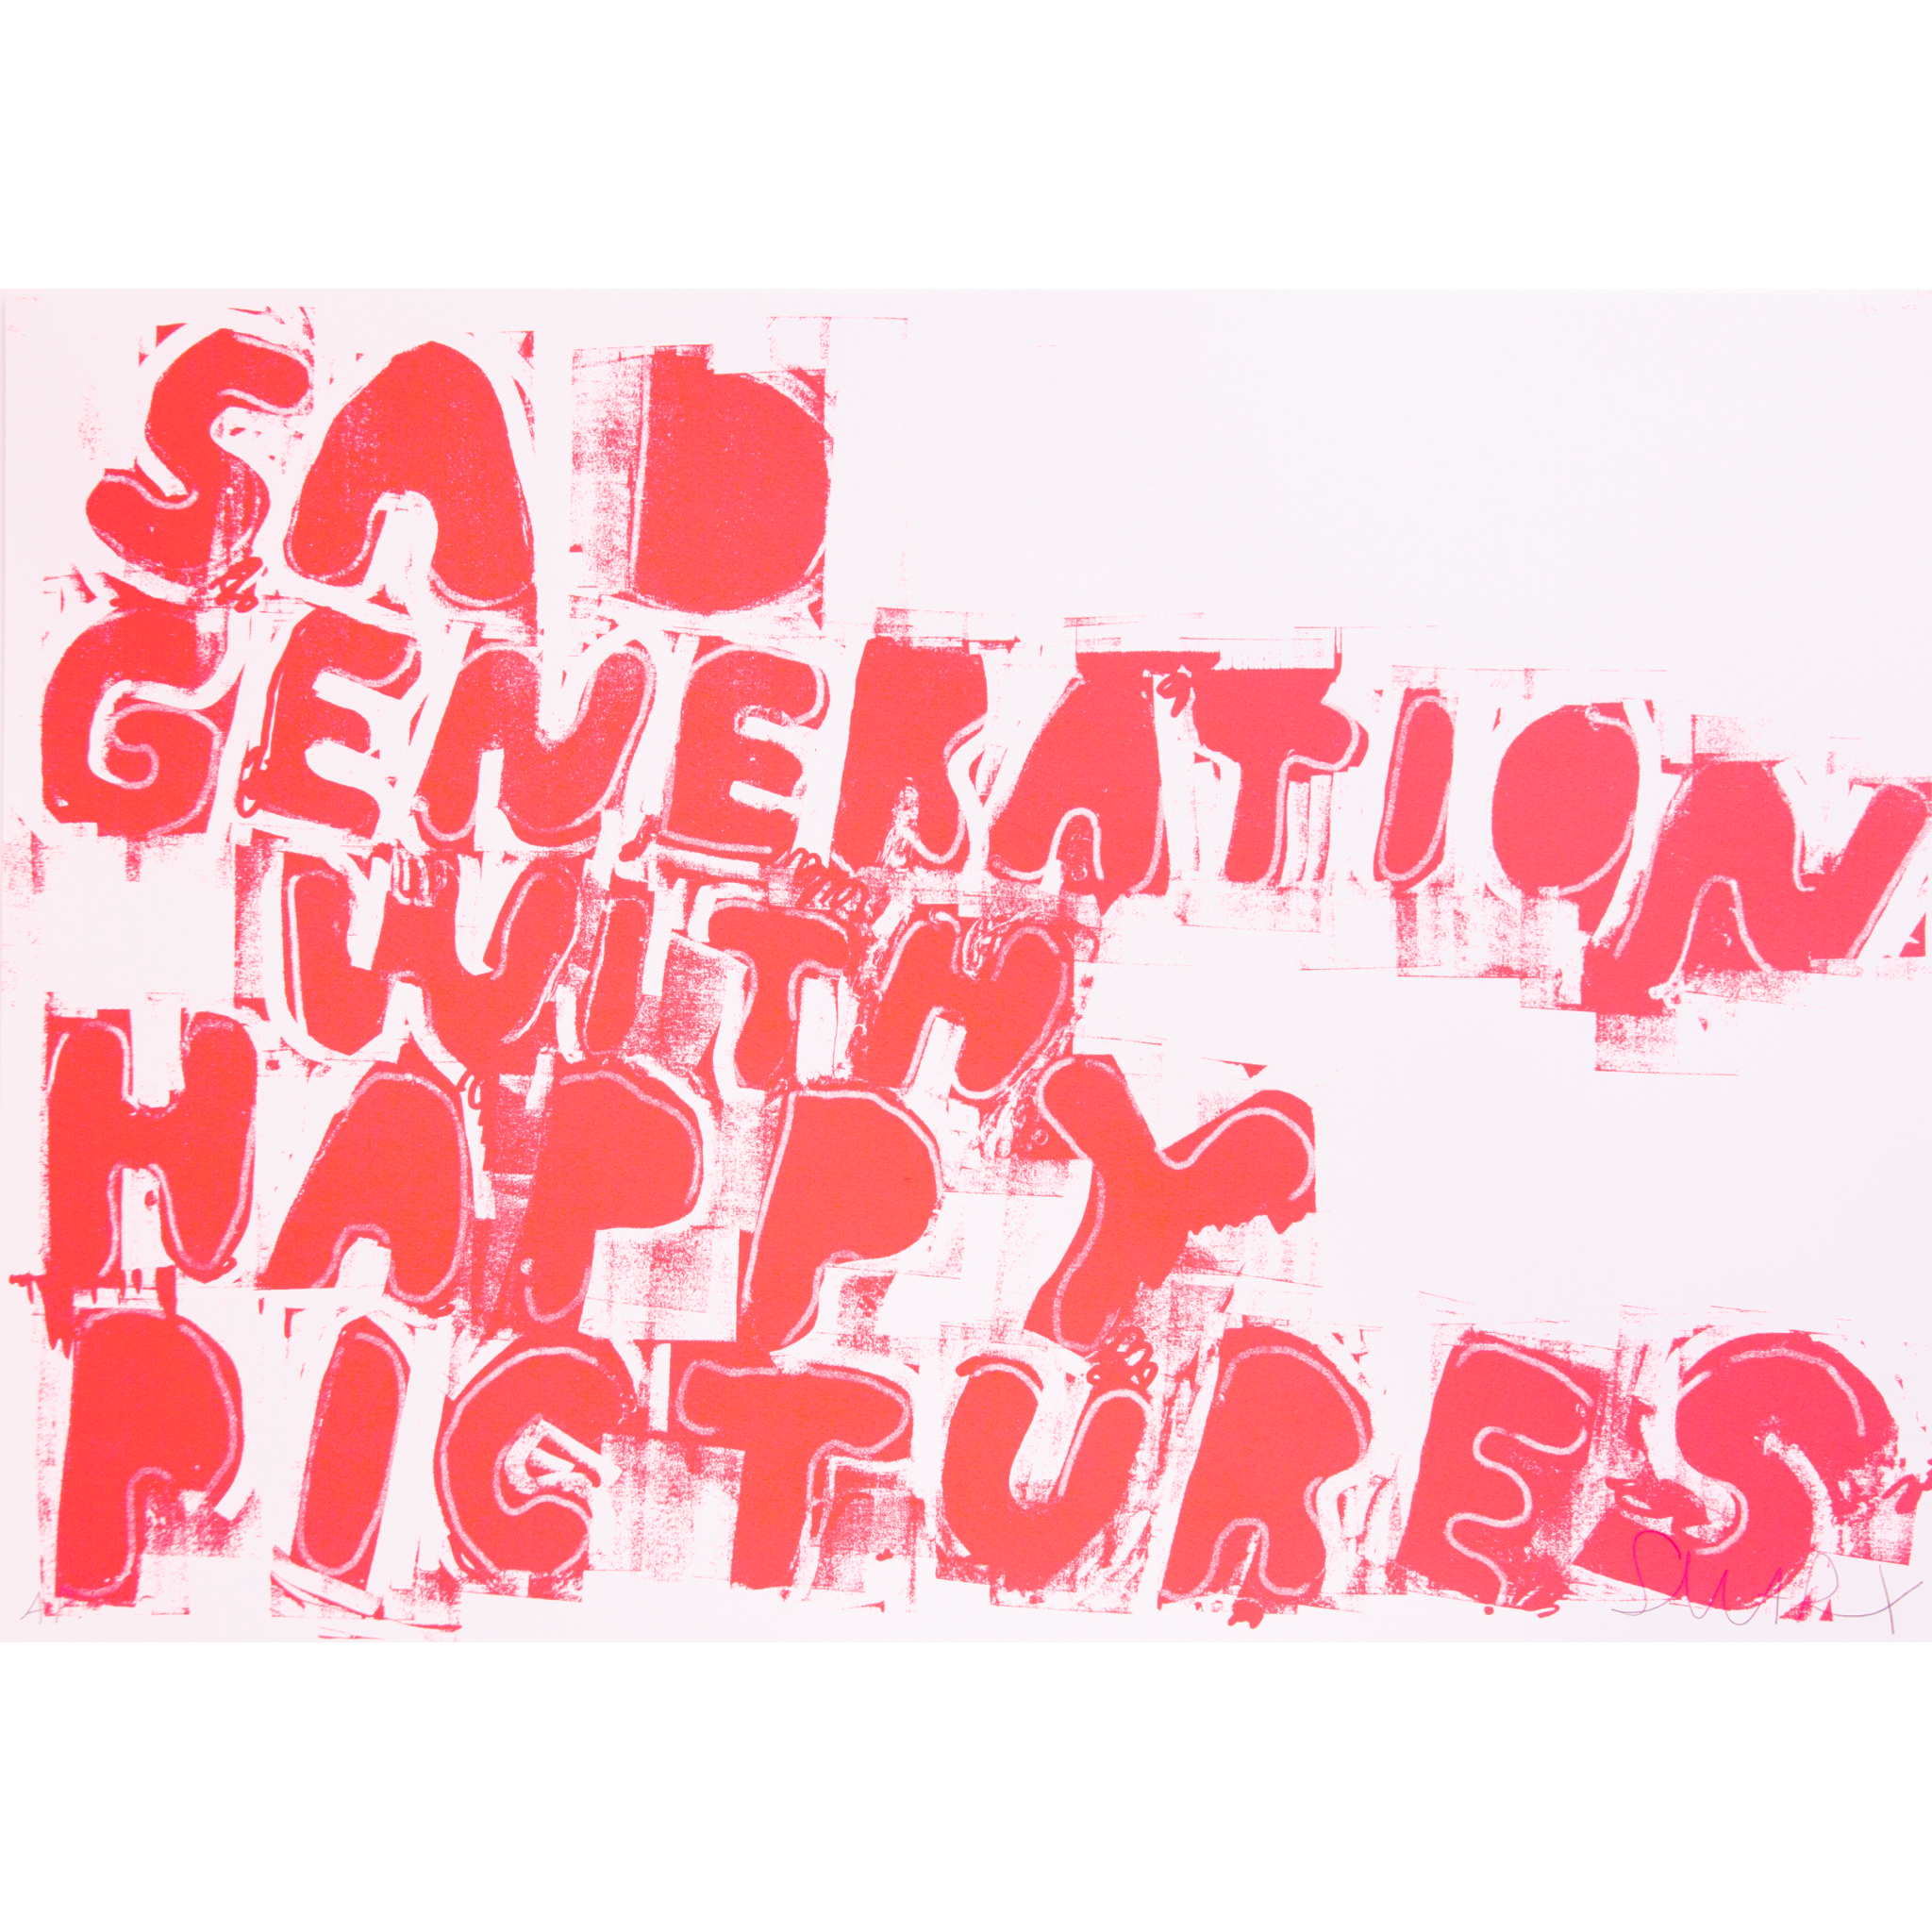 Stefan Marx - Sad Generation with Happy Pictures (Fluorescent Magenta Red), 2022